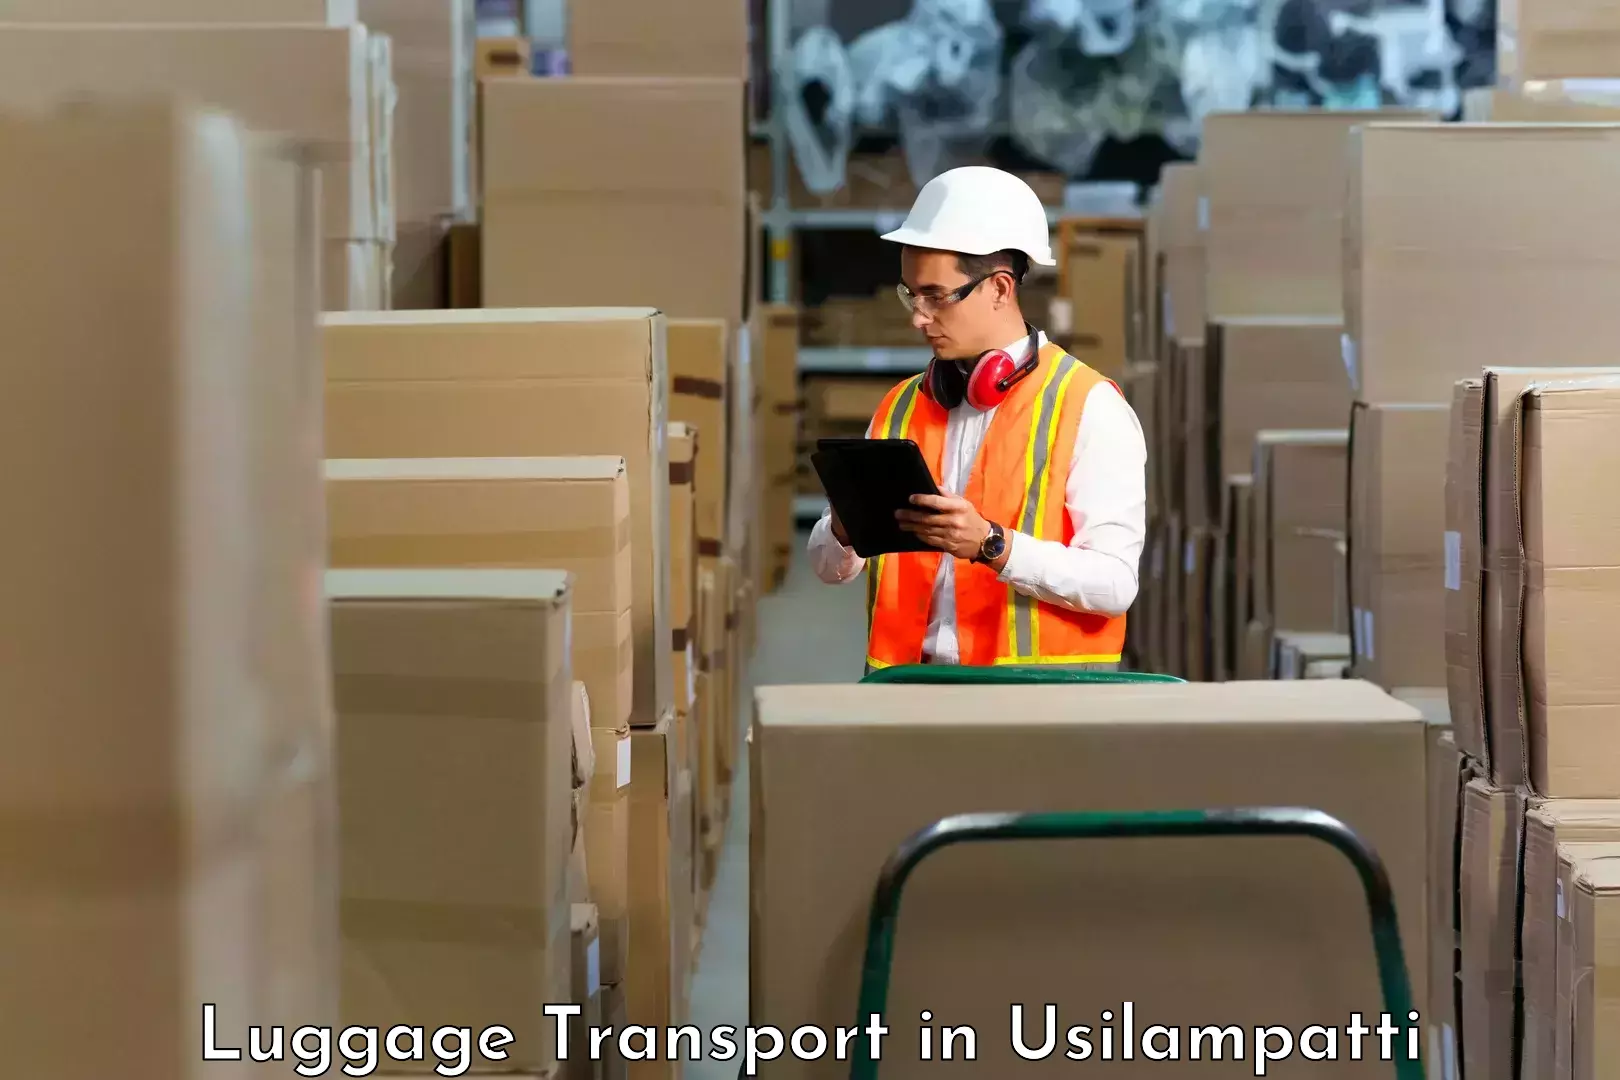 Baggage transport management in Usilampatti